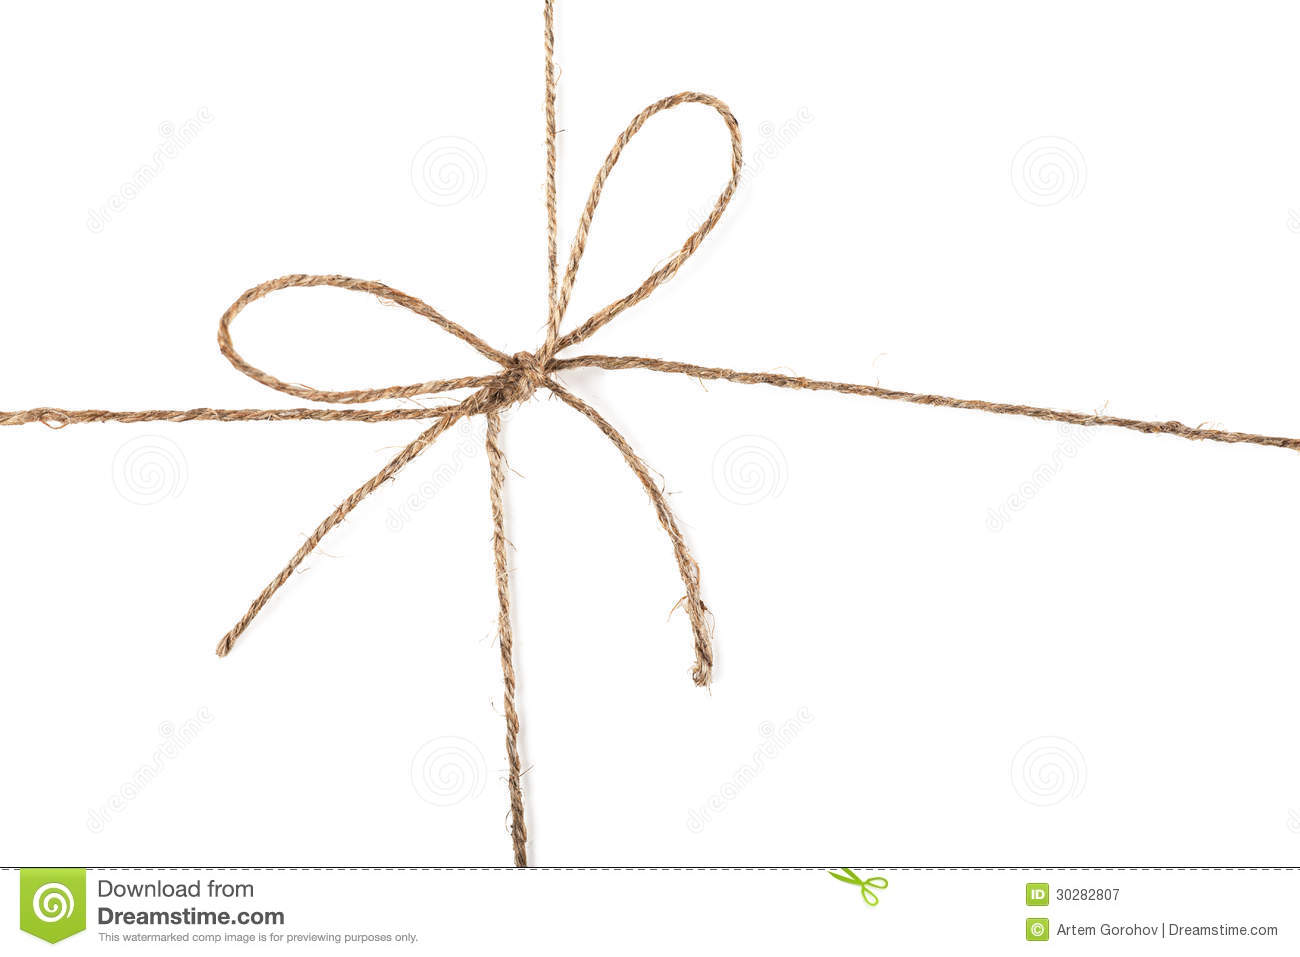 String Knot Royalty Free Stock Photography   Image  30282807